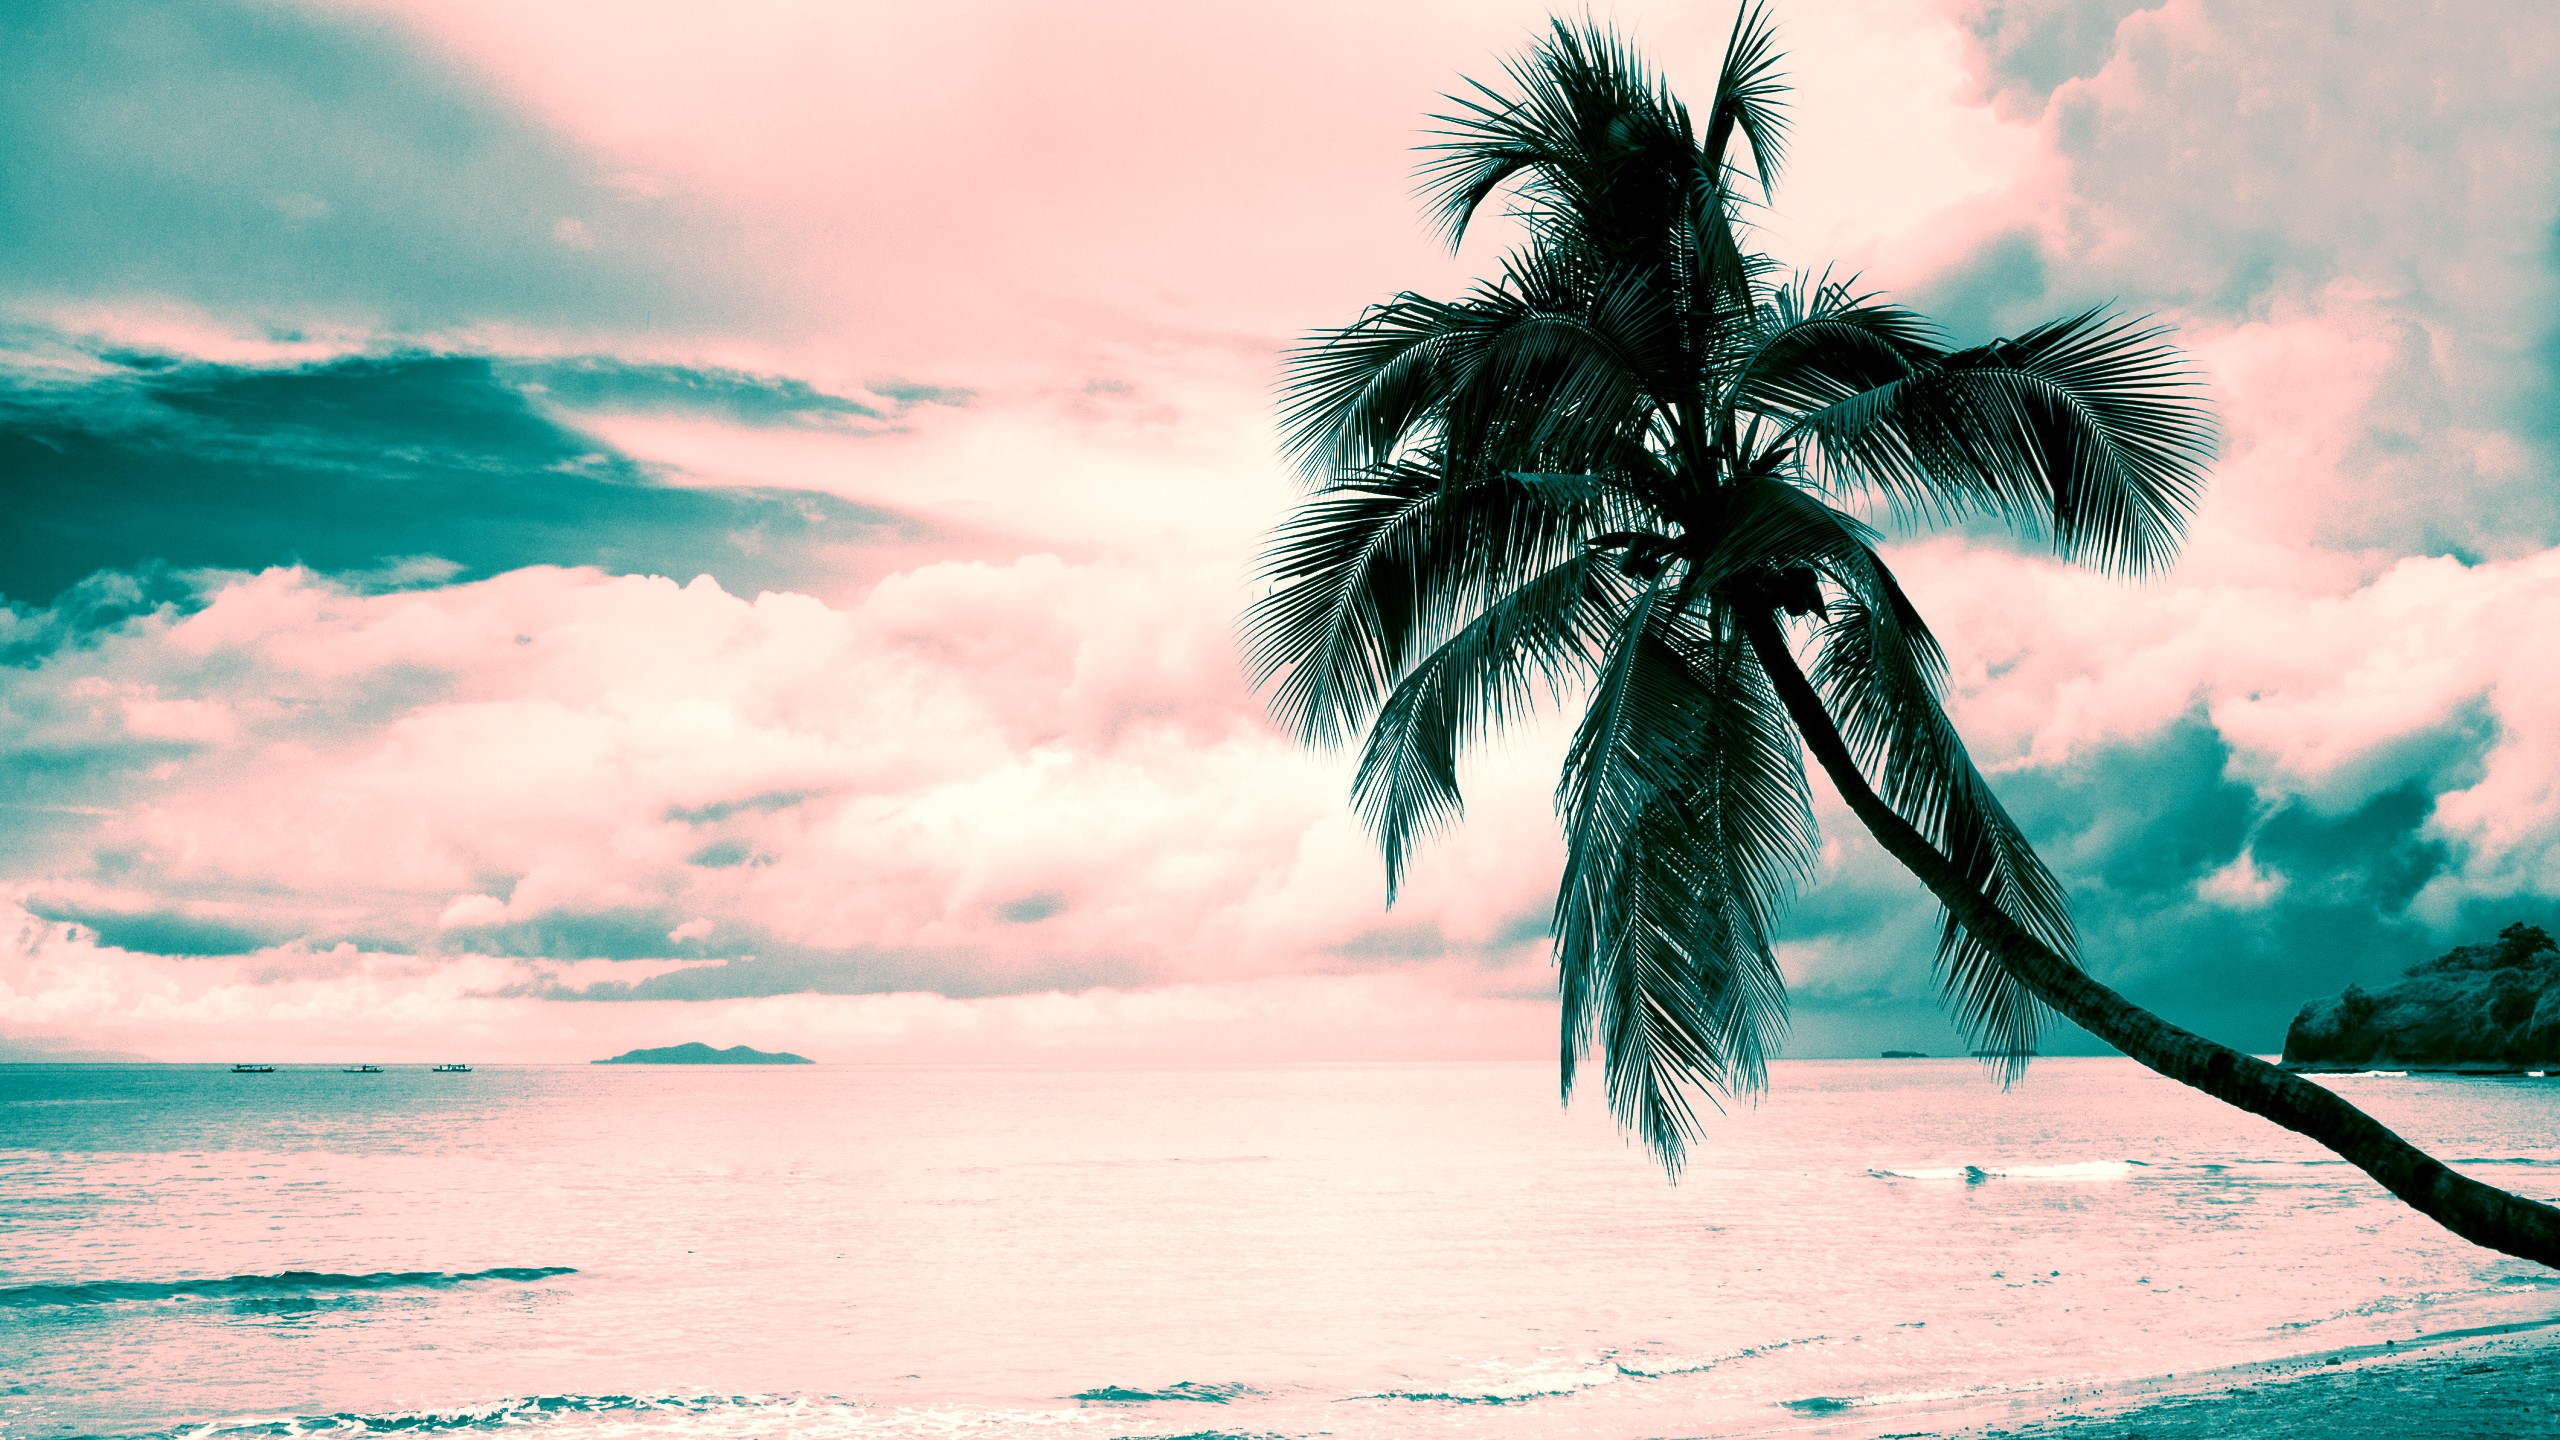 beach, Pink, Turquoise, Coconut palms, Clouds, Pink clouds Wallpaper